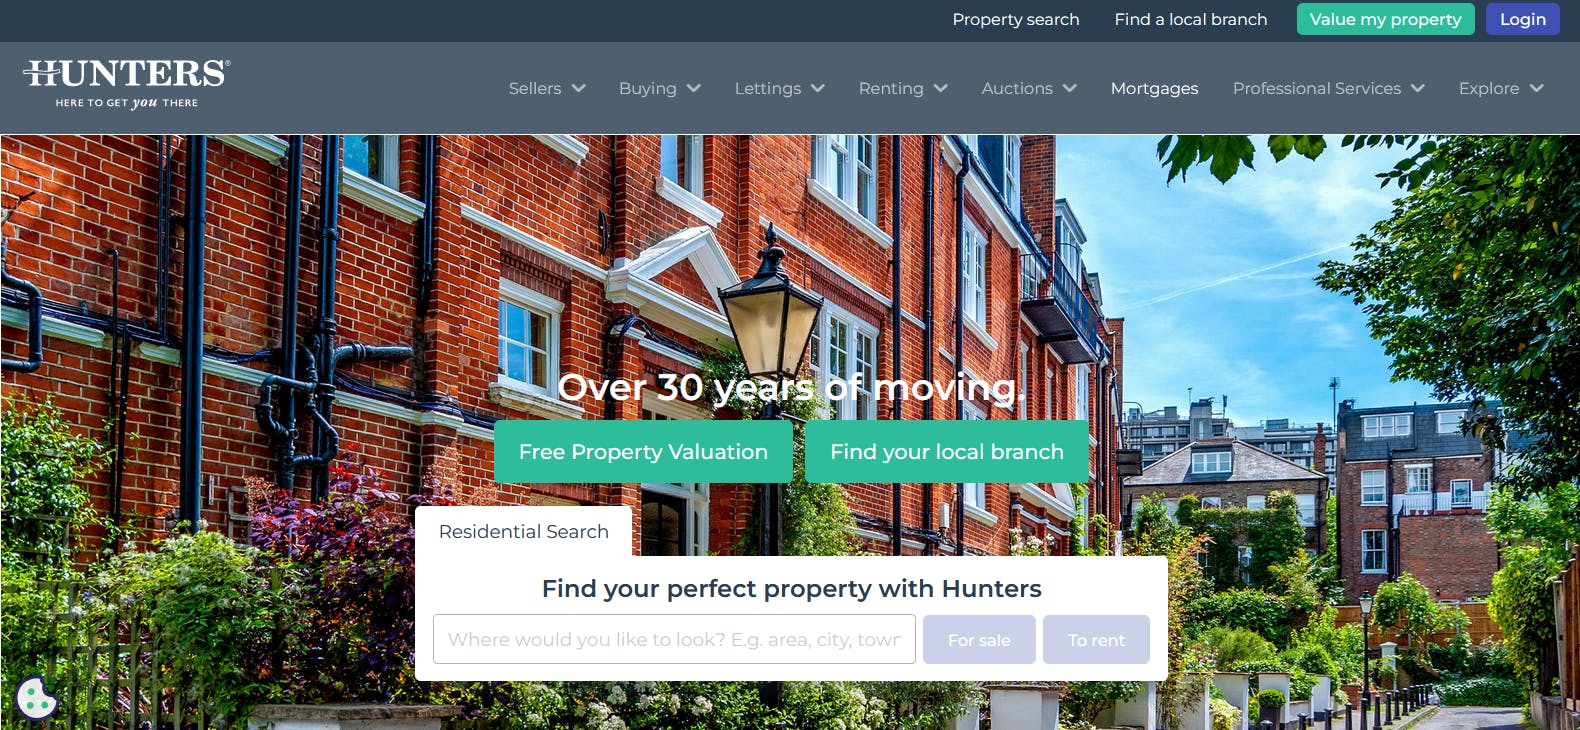 An image of Hunters Estate landing page.